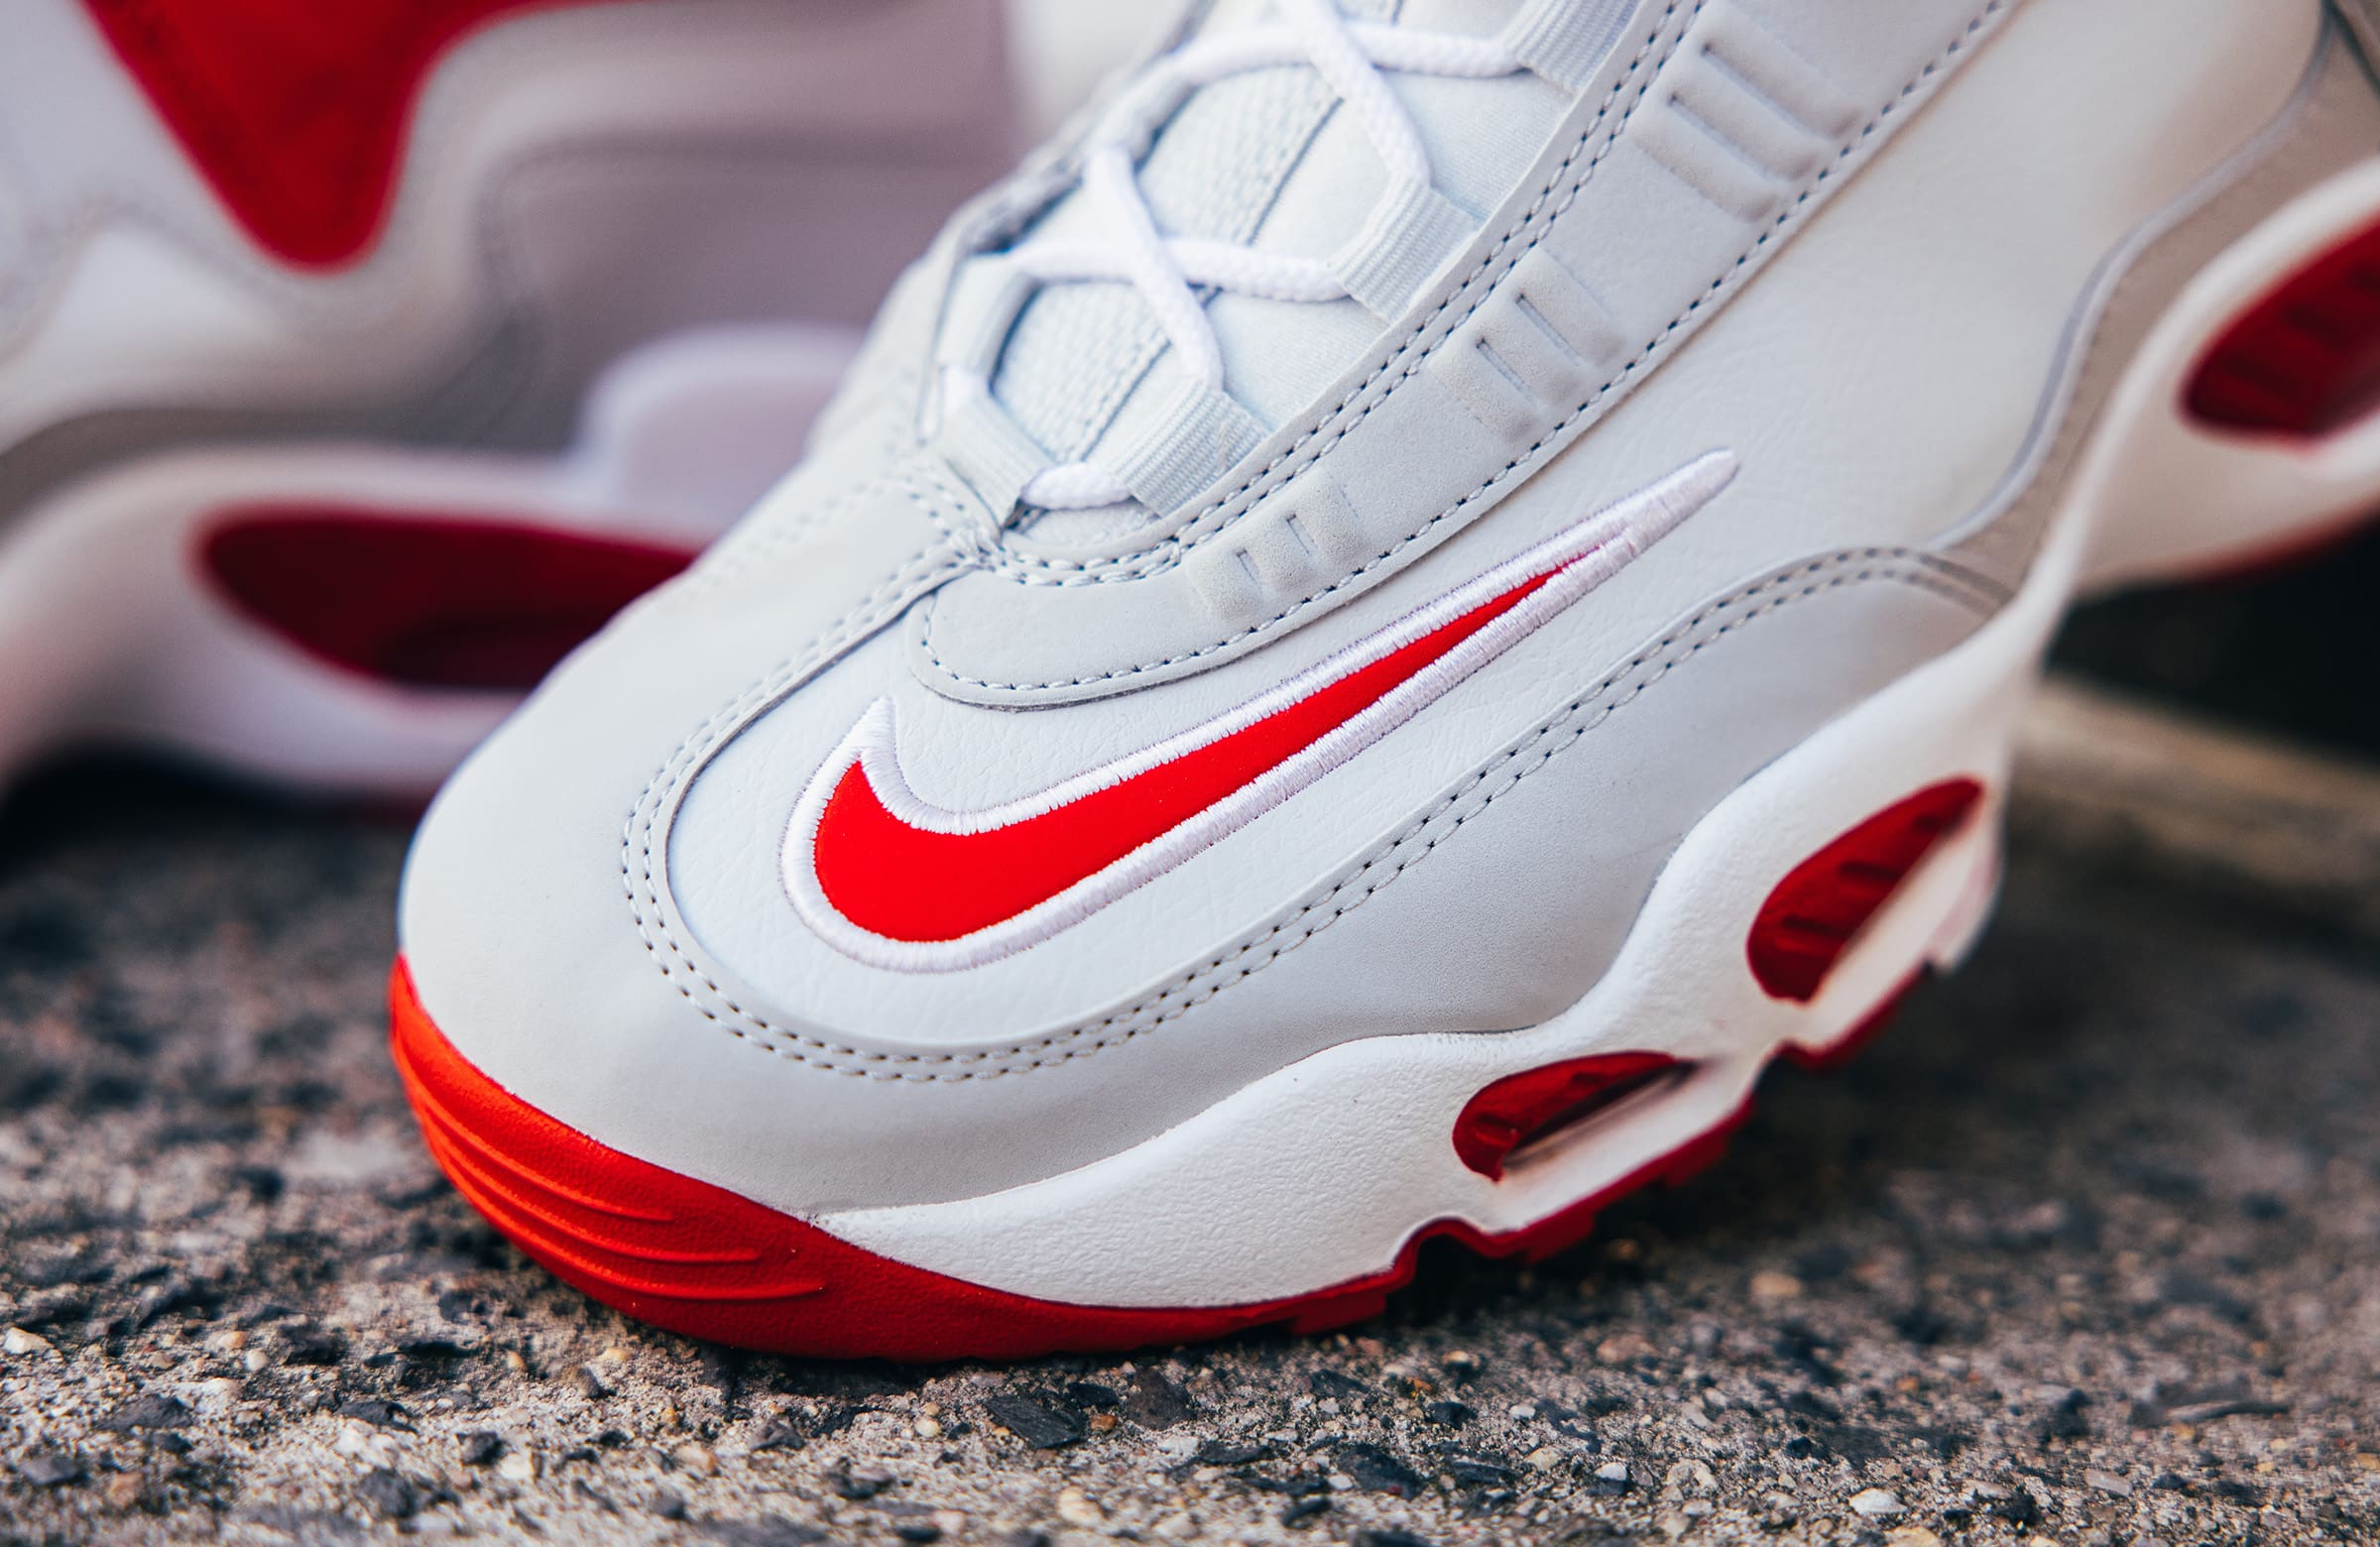 Sneaker Files on Instagram: Like if you would like to see the Nike Air  Griffey Max 1 'Cincinnati Reds' return. Follow @sneakerfiles for more  sneaker news.